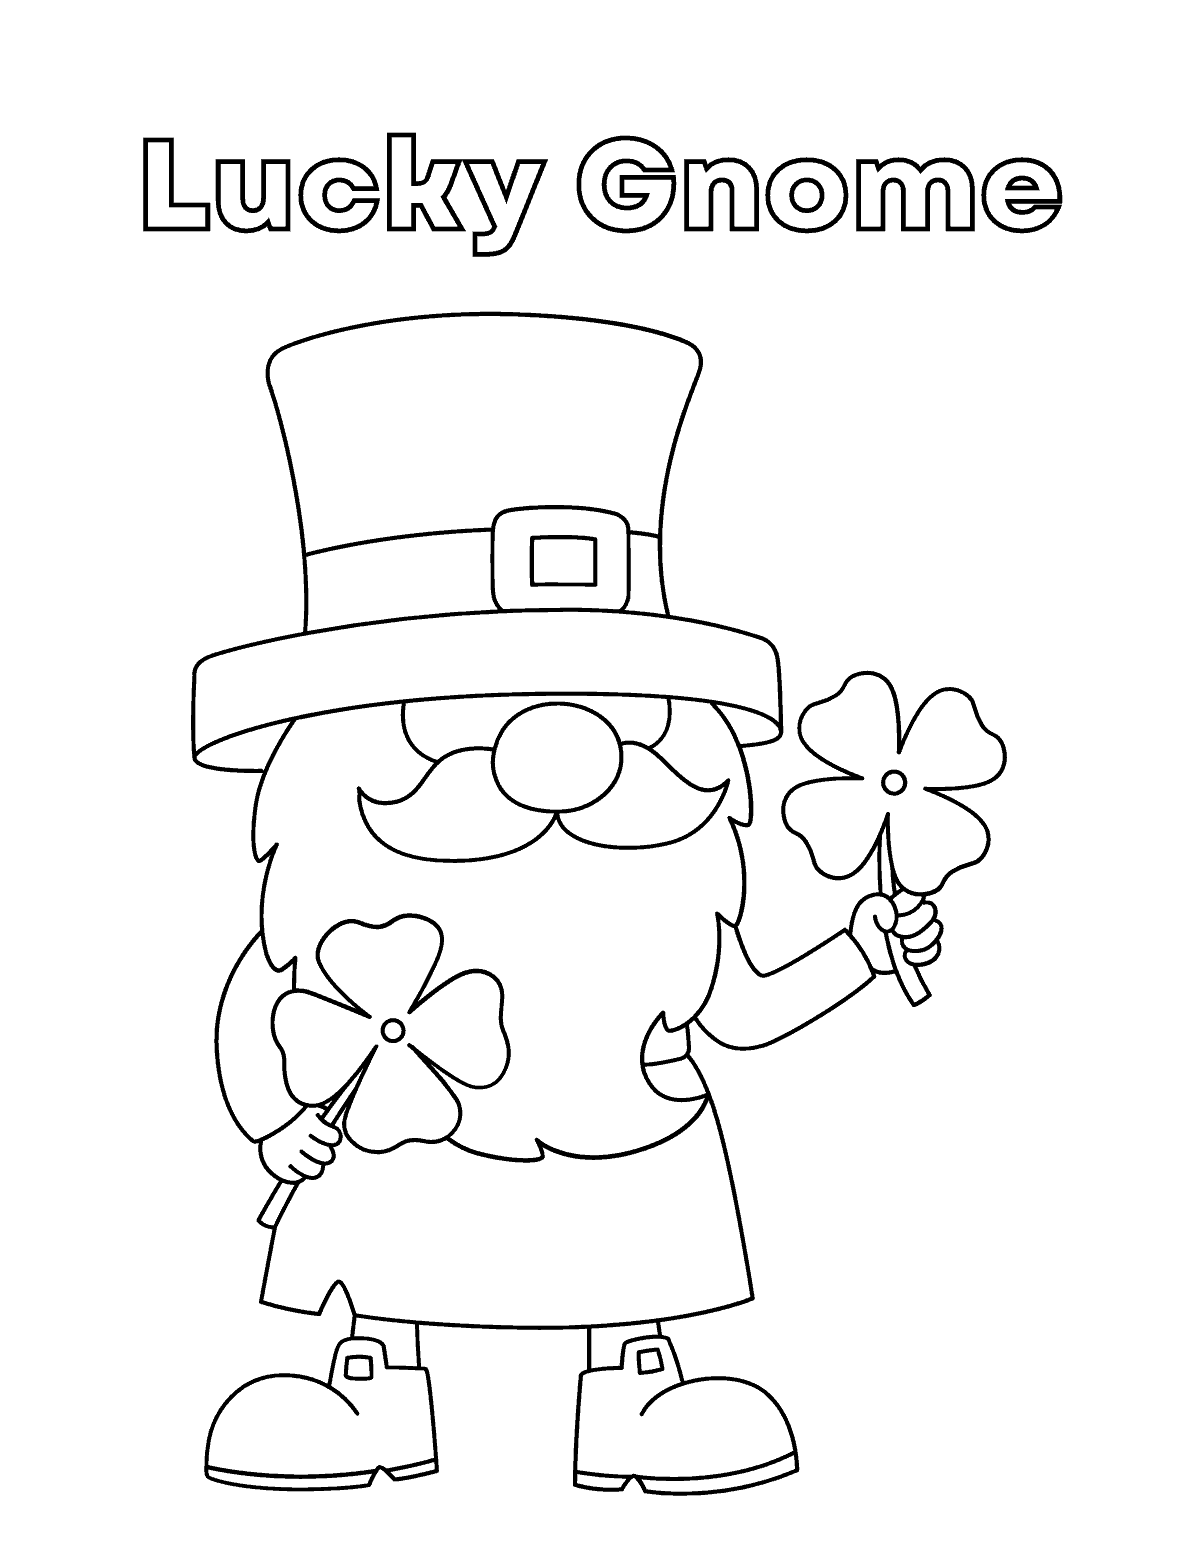 Lucky Gnome with Shamrock Coloring Page